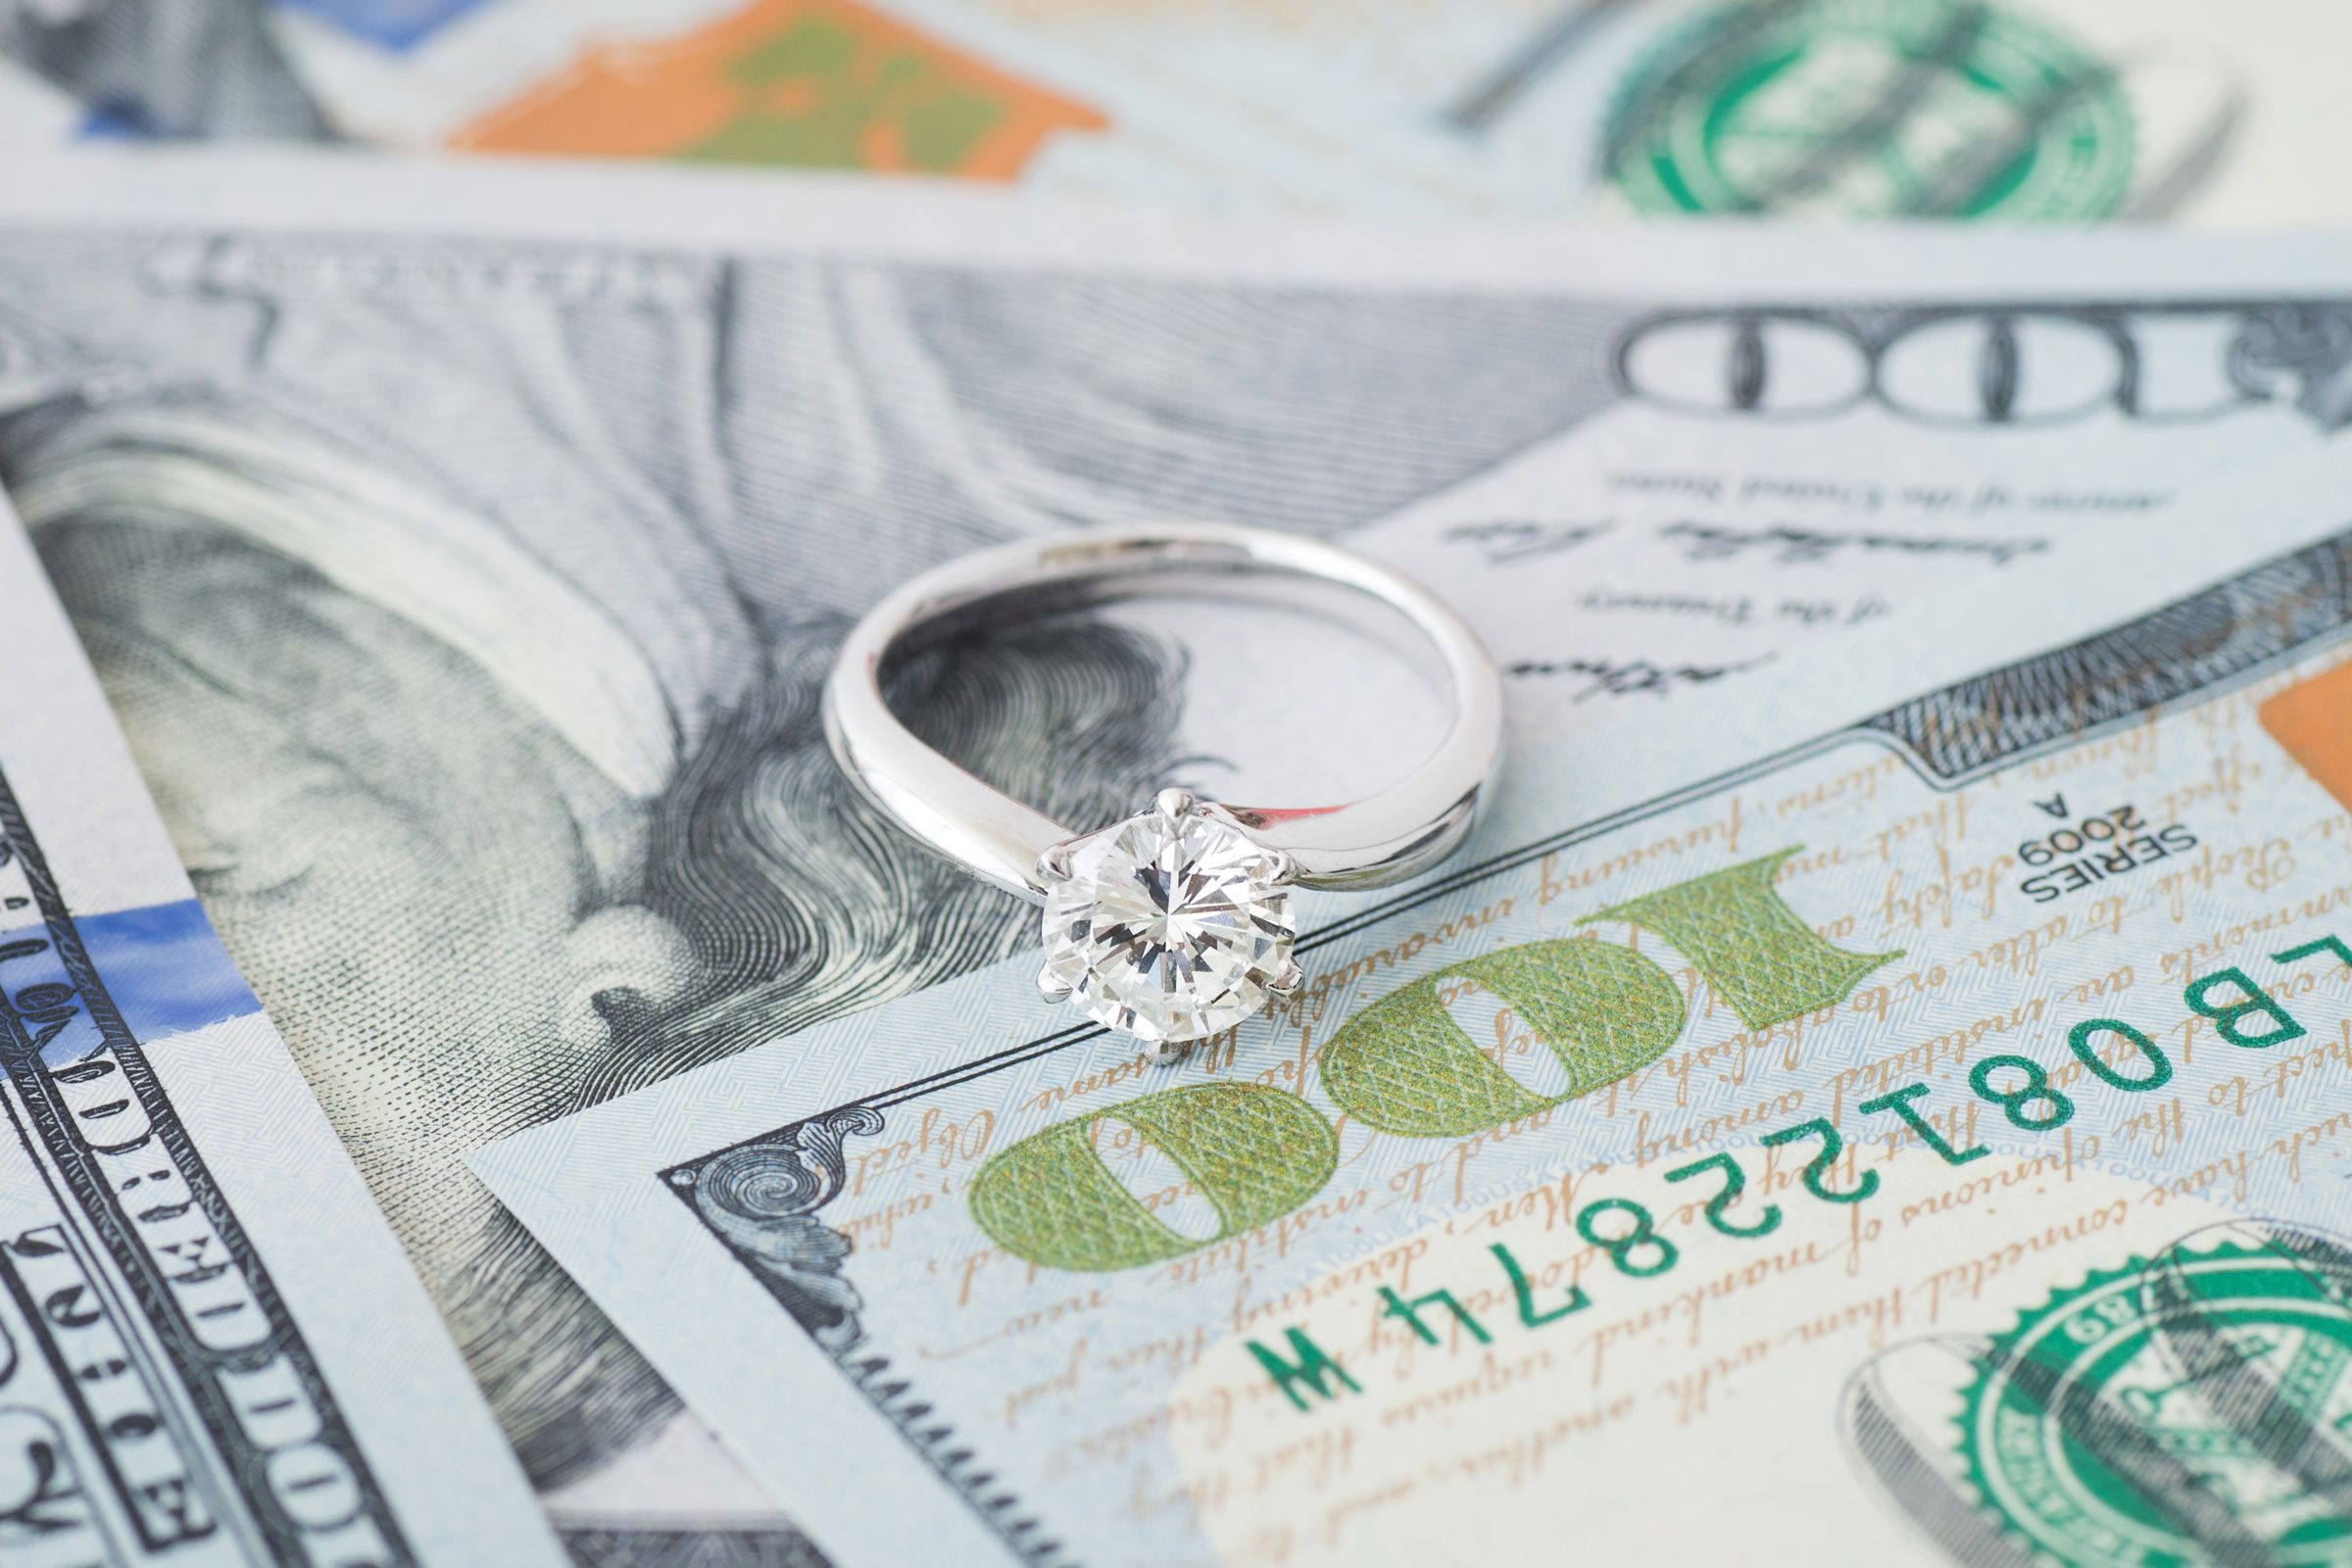 Average Cost of a Wedding Ring: How Much to Spend